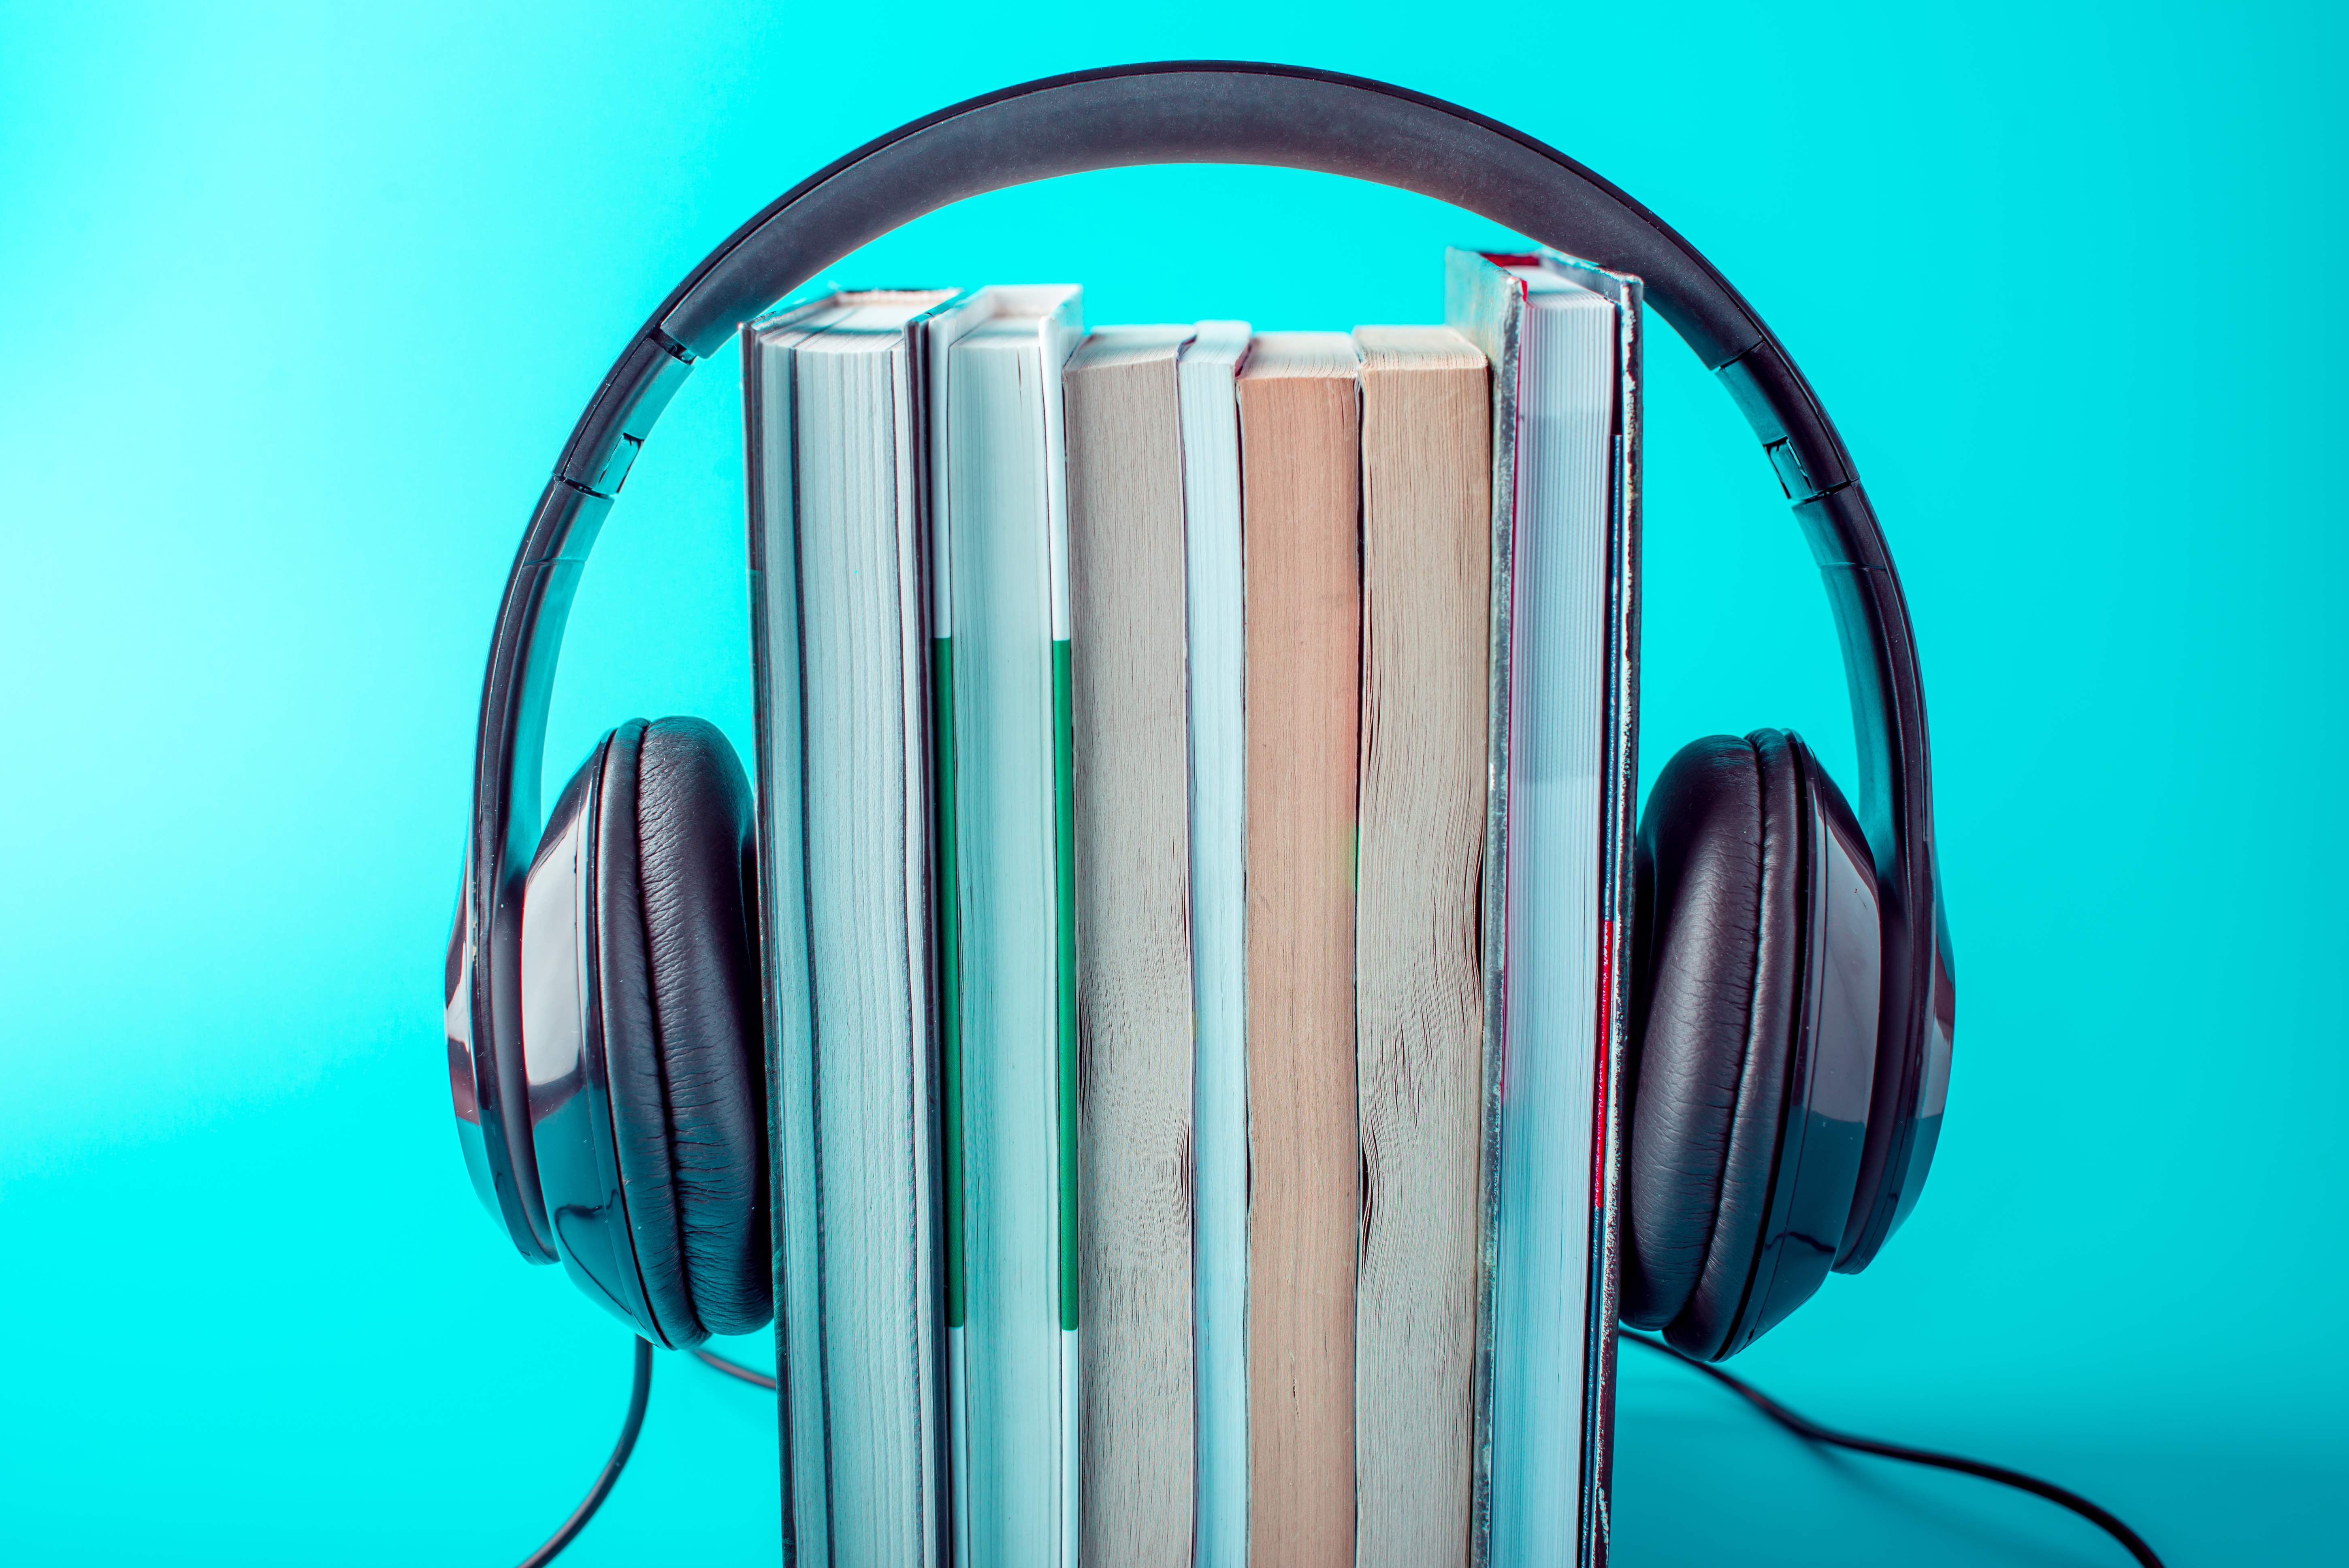 Are audiobooks the full book?